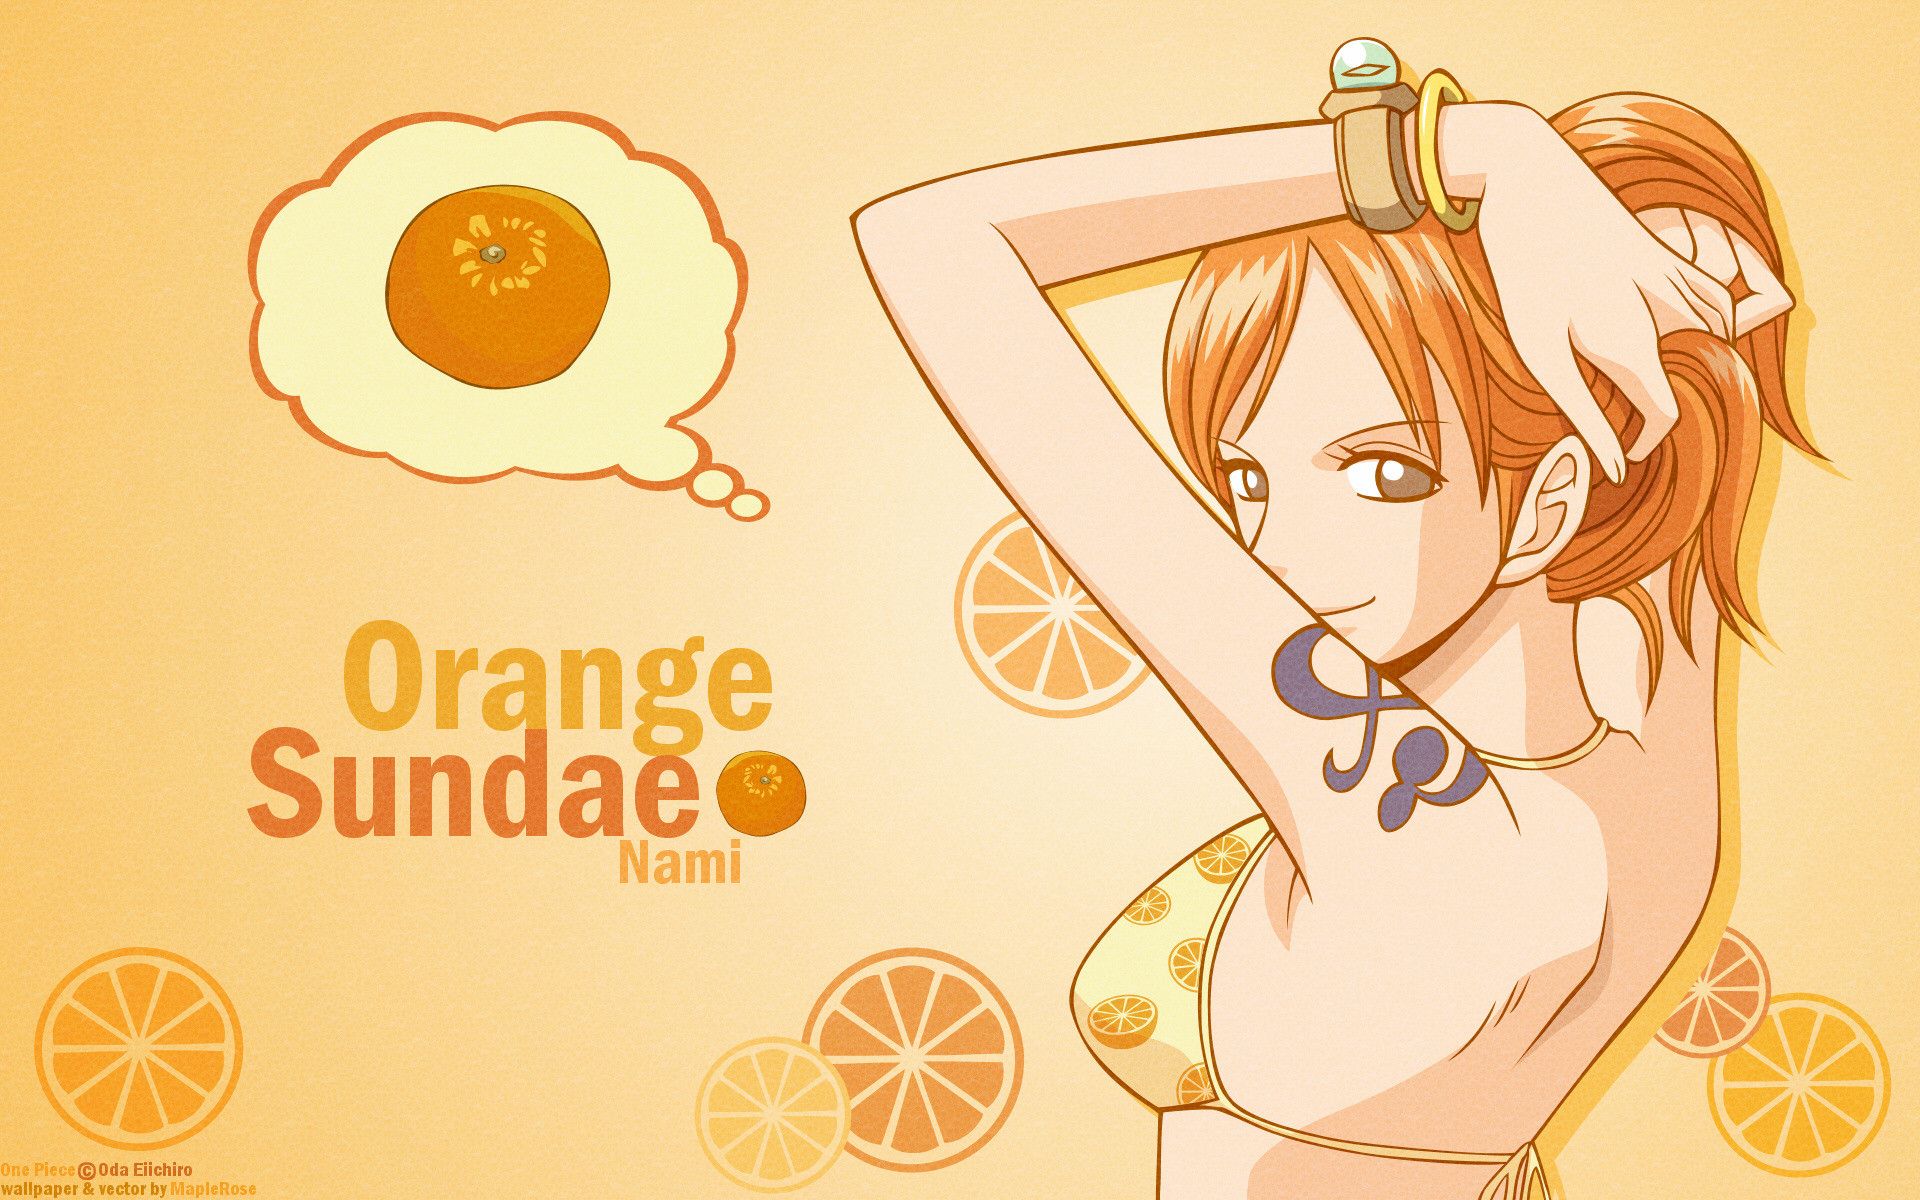 Wallpapers One Piece 2015 Nami And Law 1920x1200